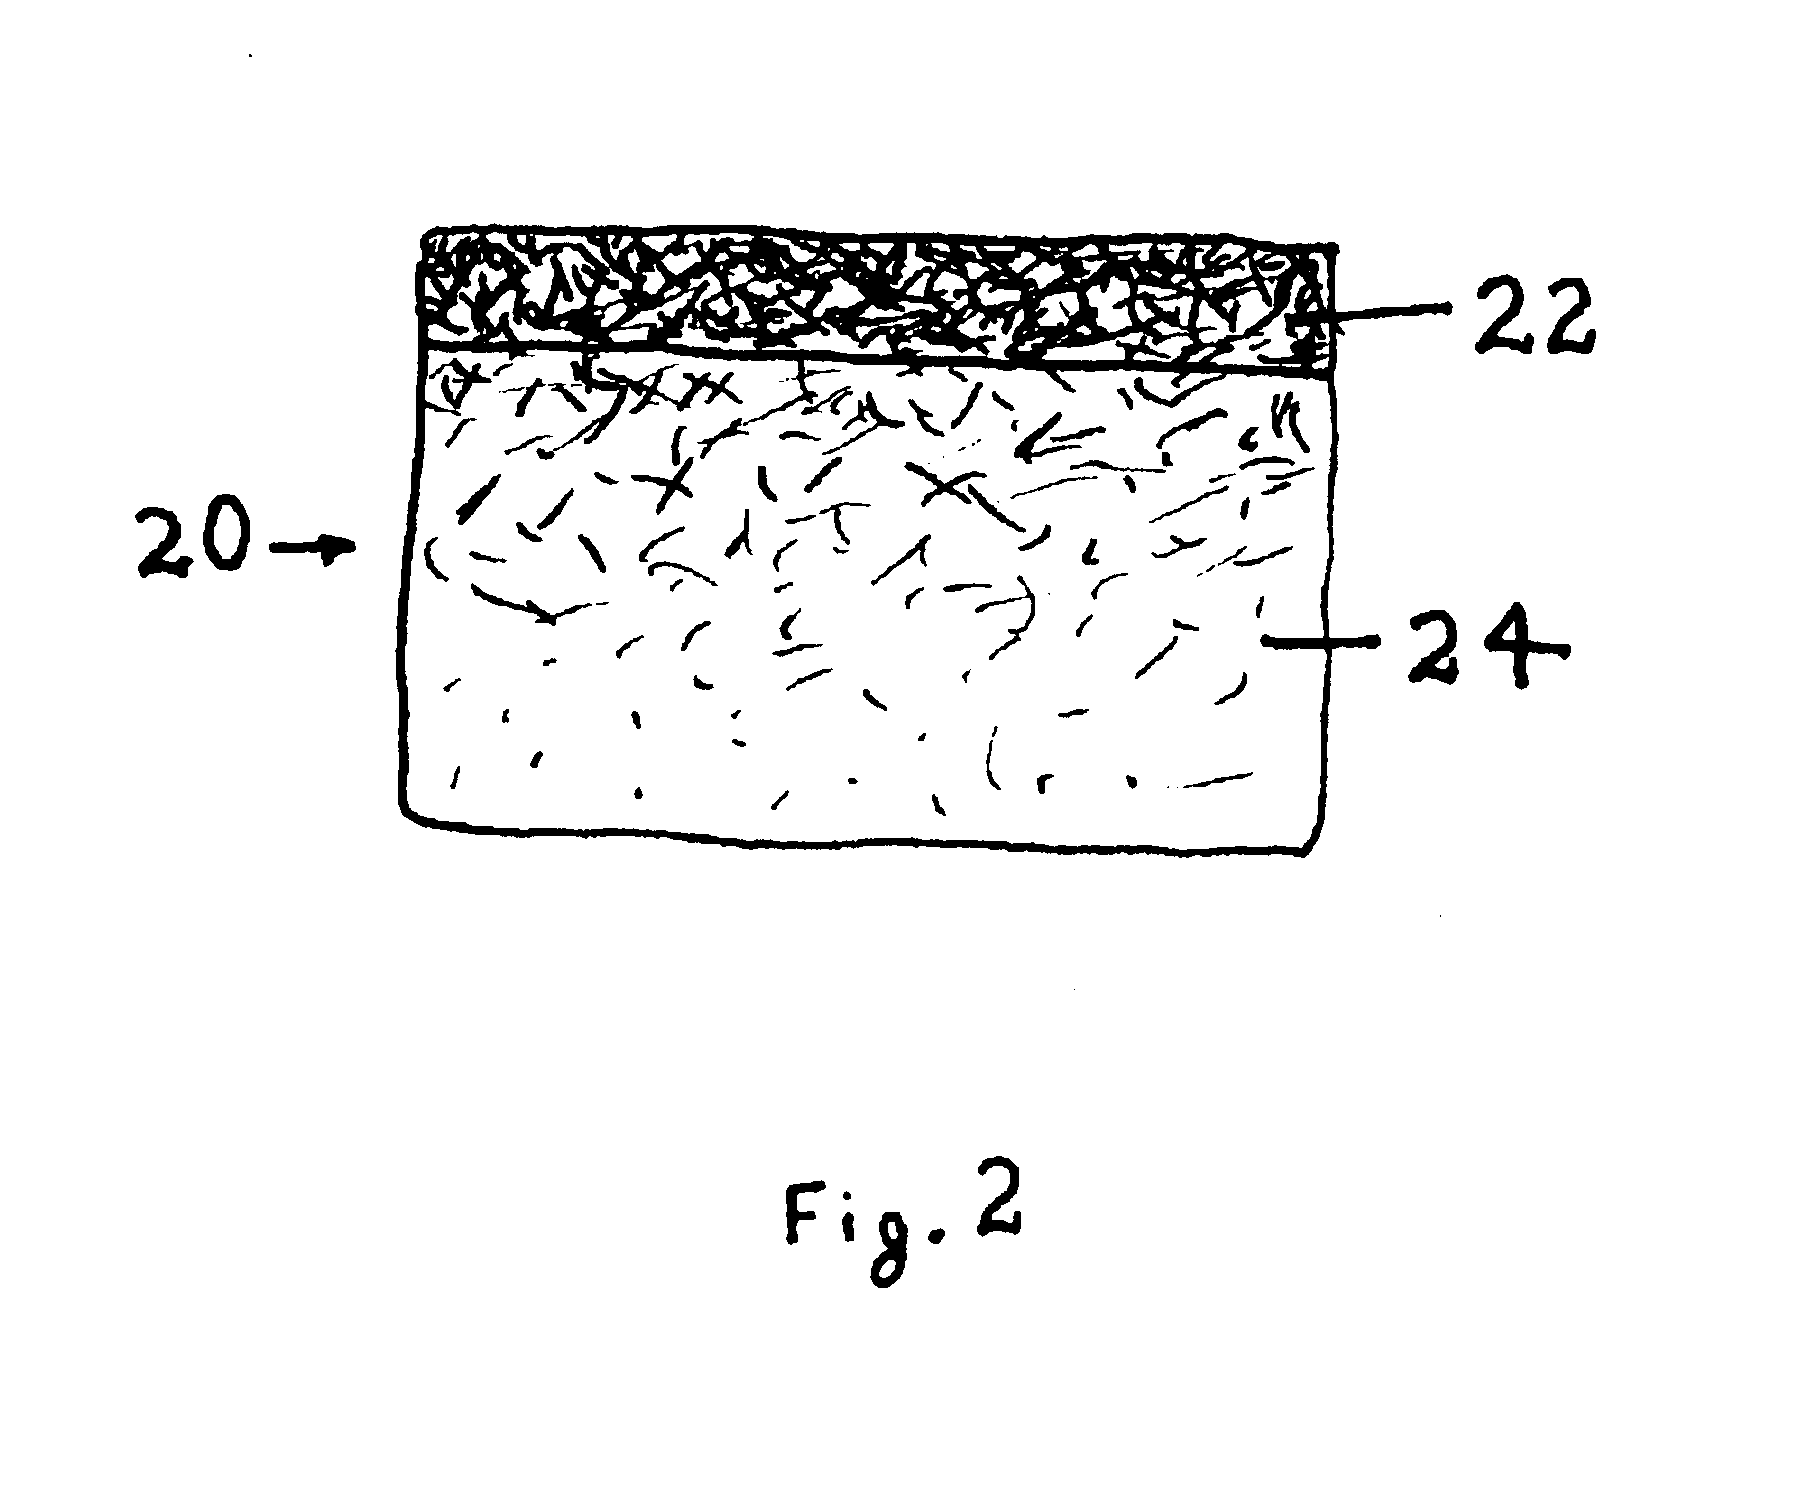 Construction materials containing surface modified fibers